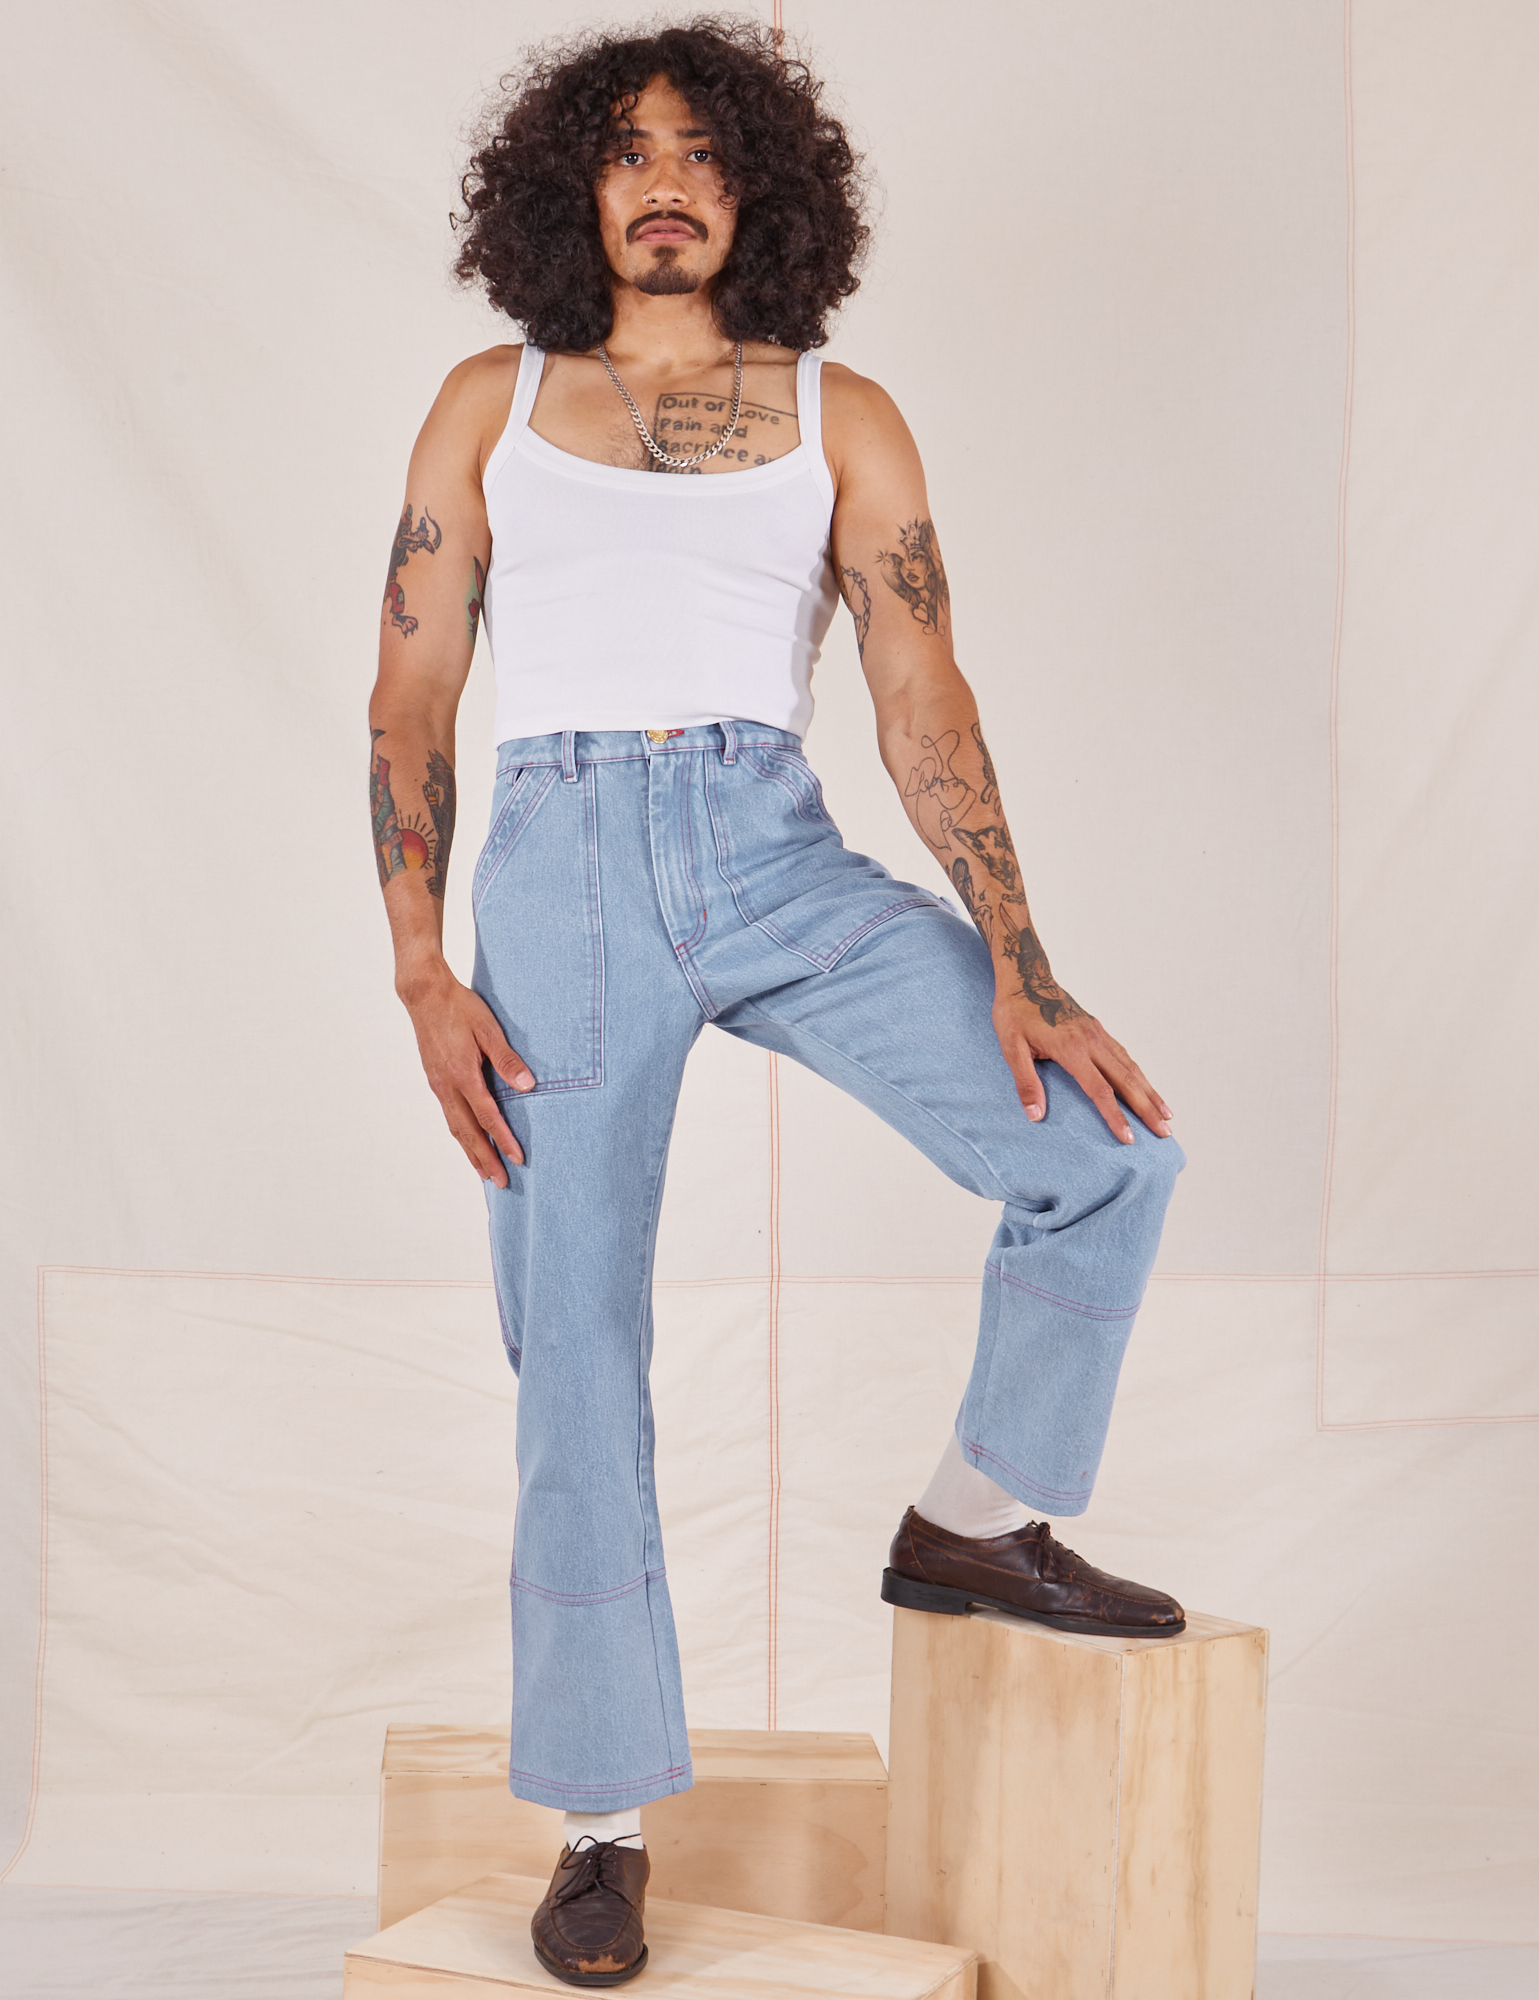 Jesse is 5&#39;8&quot; and wearing XS Carpenter Jeans in Light Wash paired with a vintage off-white Cami